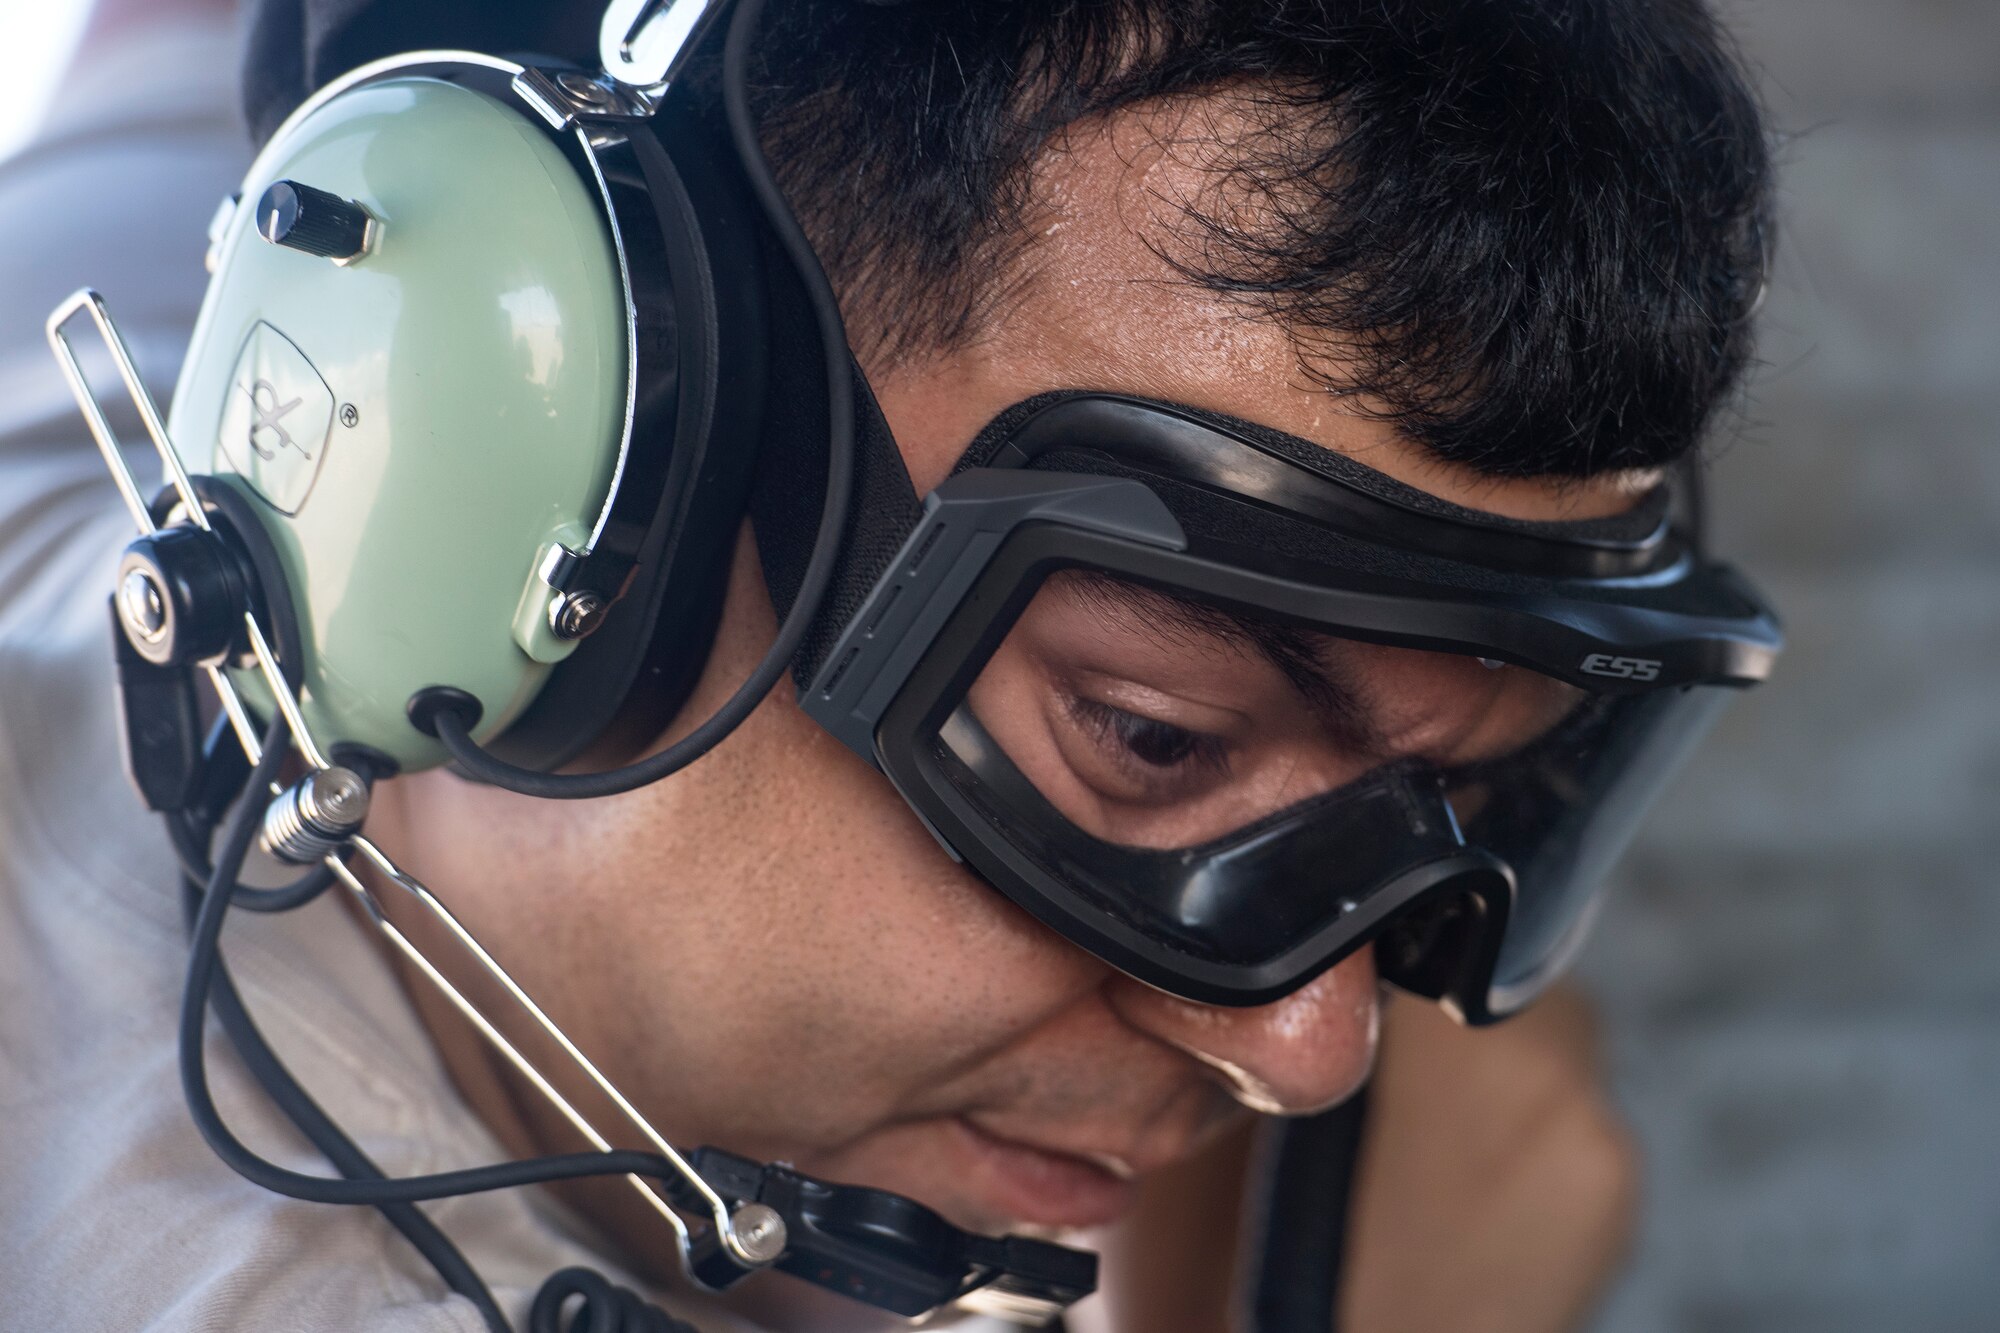 Senior Airman Jeremy David, 41st Helicopter Maintenance Unit (HMU) crew chief, performs the final checks before launching an HH-60G Pave Hawk, Aug. 17, 2018, at Patrick Air Force Base, Fla. Airmen from the 41st Rescue Squadron and 41st HMU traveled to Patrick AFB to participate in a spin-up exercise. During the exercise, Airmen faced scenarios and situations they may encounter downrange. (U.S. Air Force photo by Senior Airman Janiqua P. Robinson)